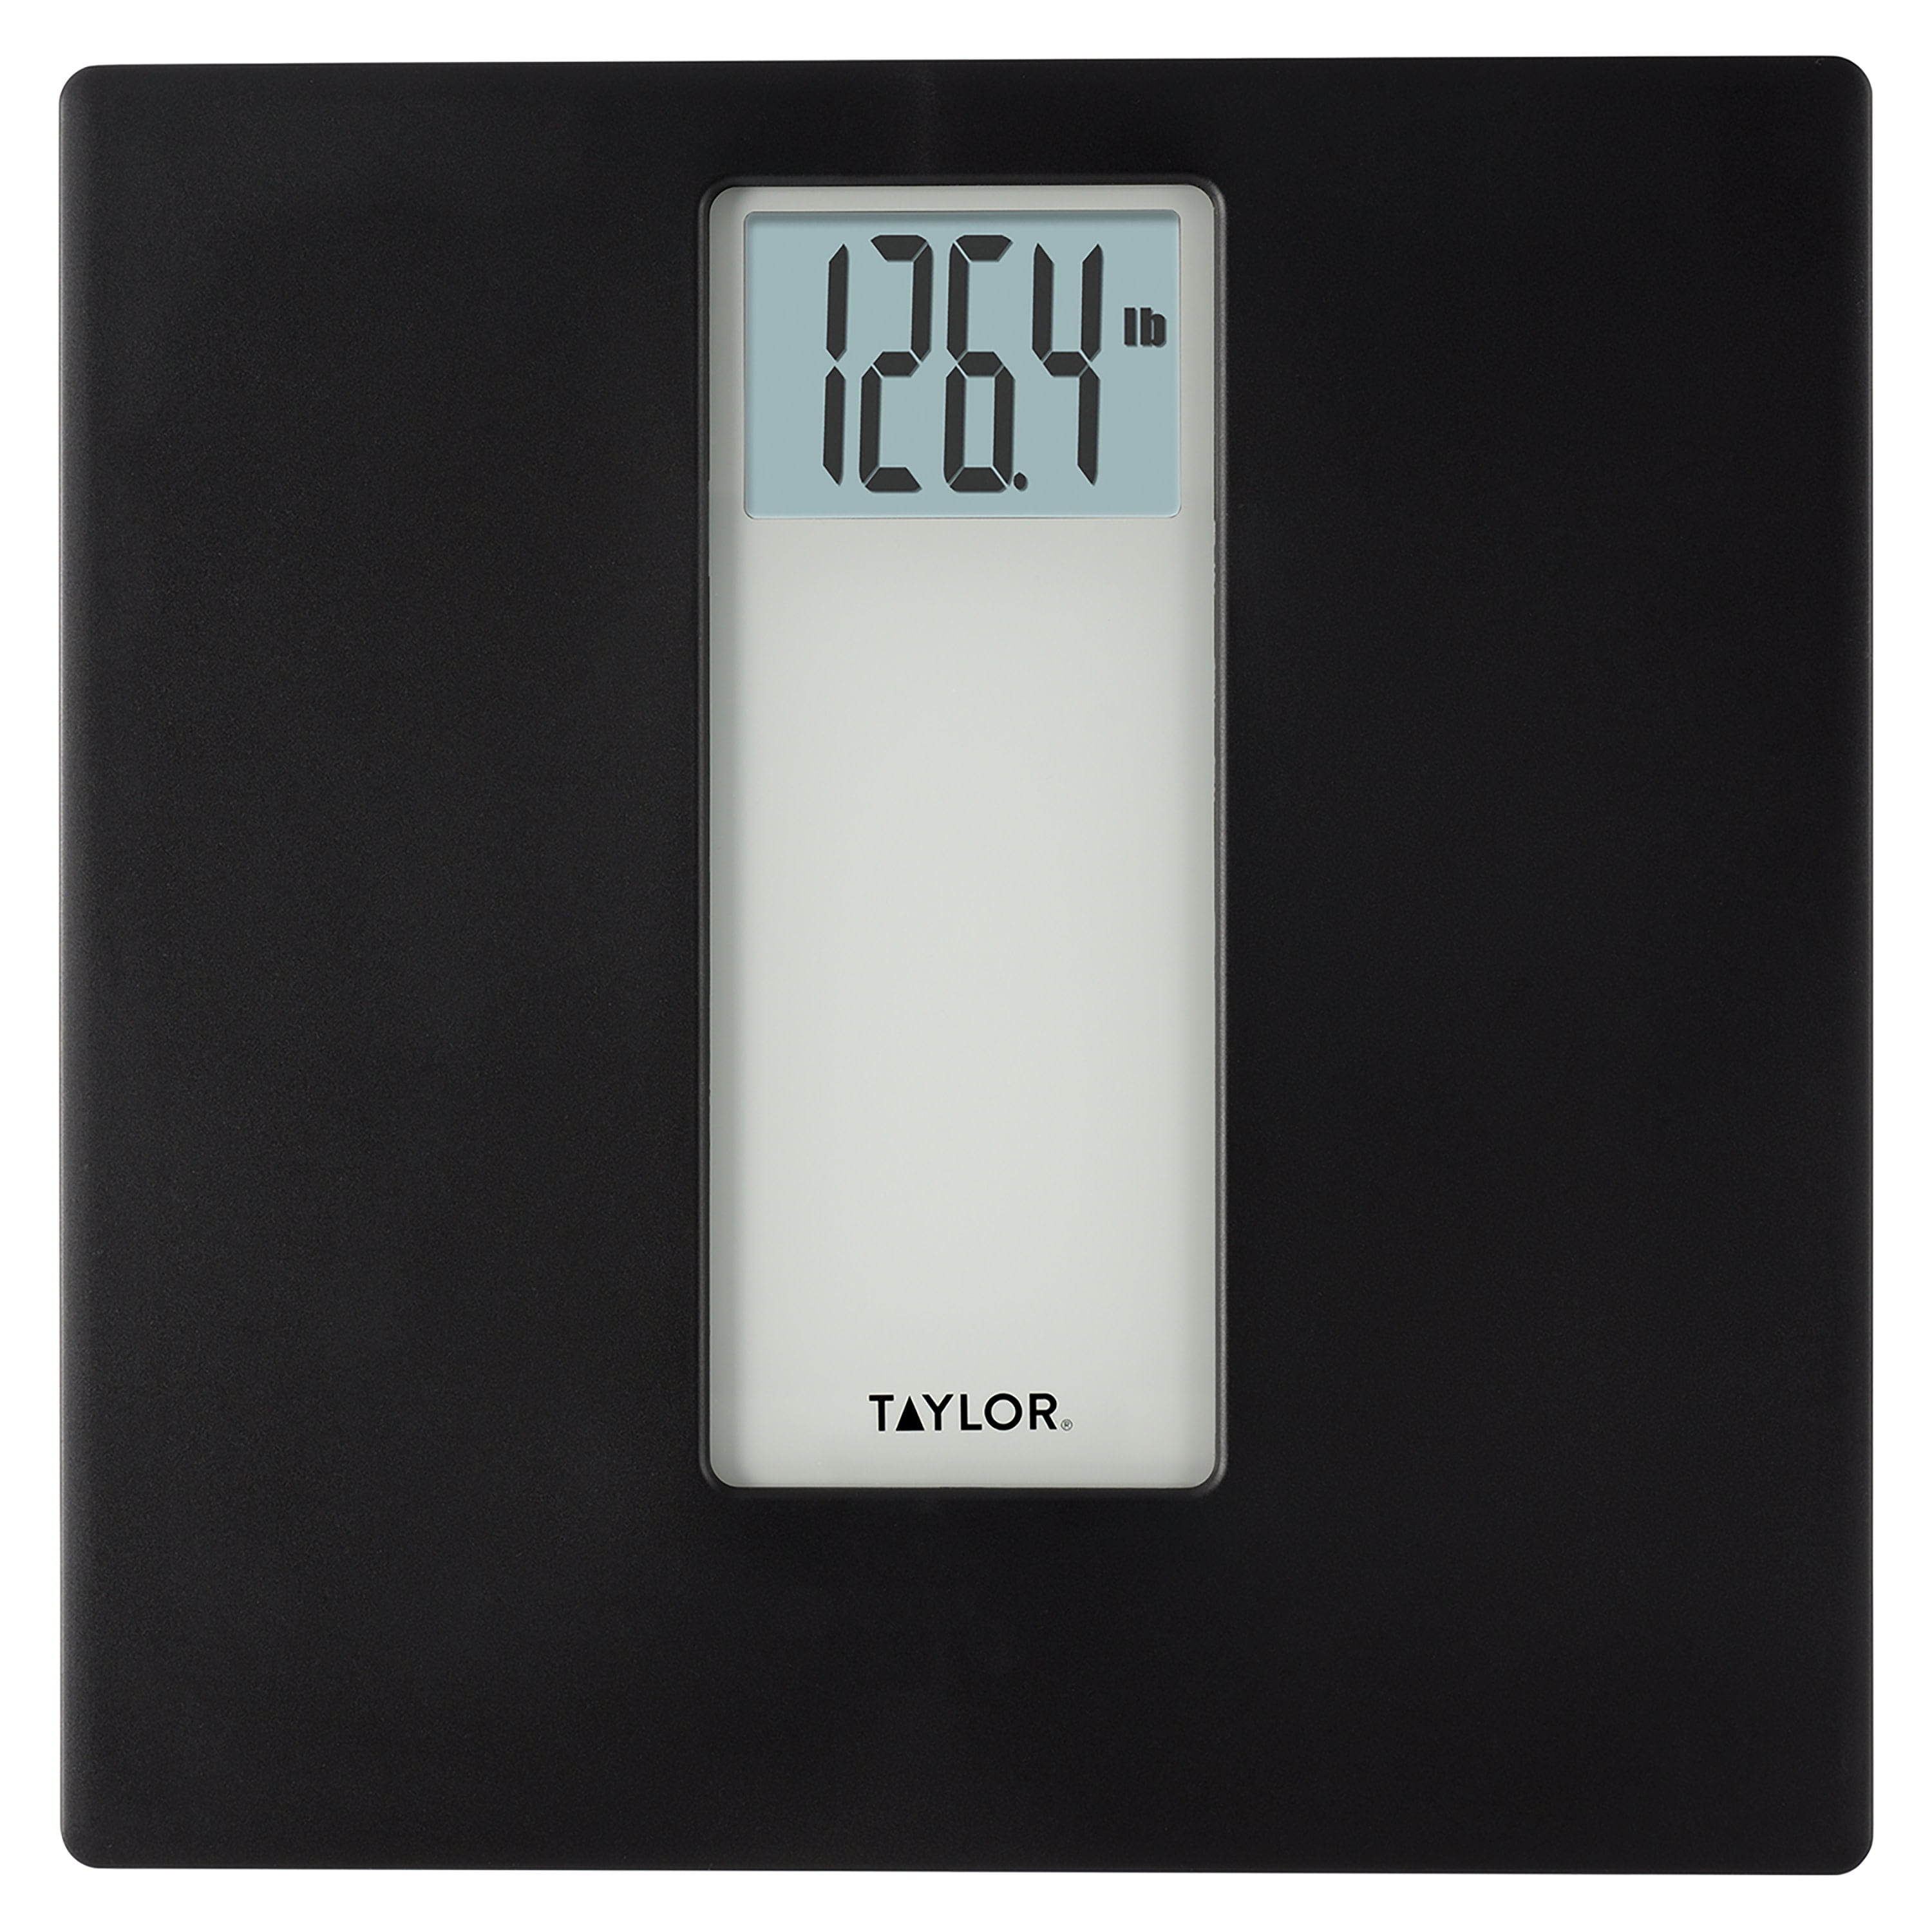 Taylor Digital Scale for Body Weight, High 400 LB Capacity, Easy to Read  Readout Display with Silver Bezel Accent, Durable Platform, White